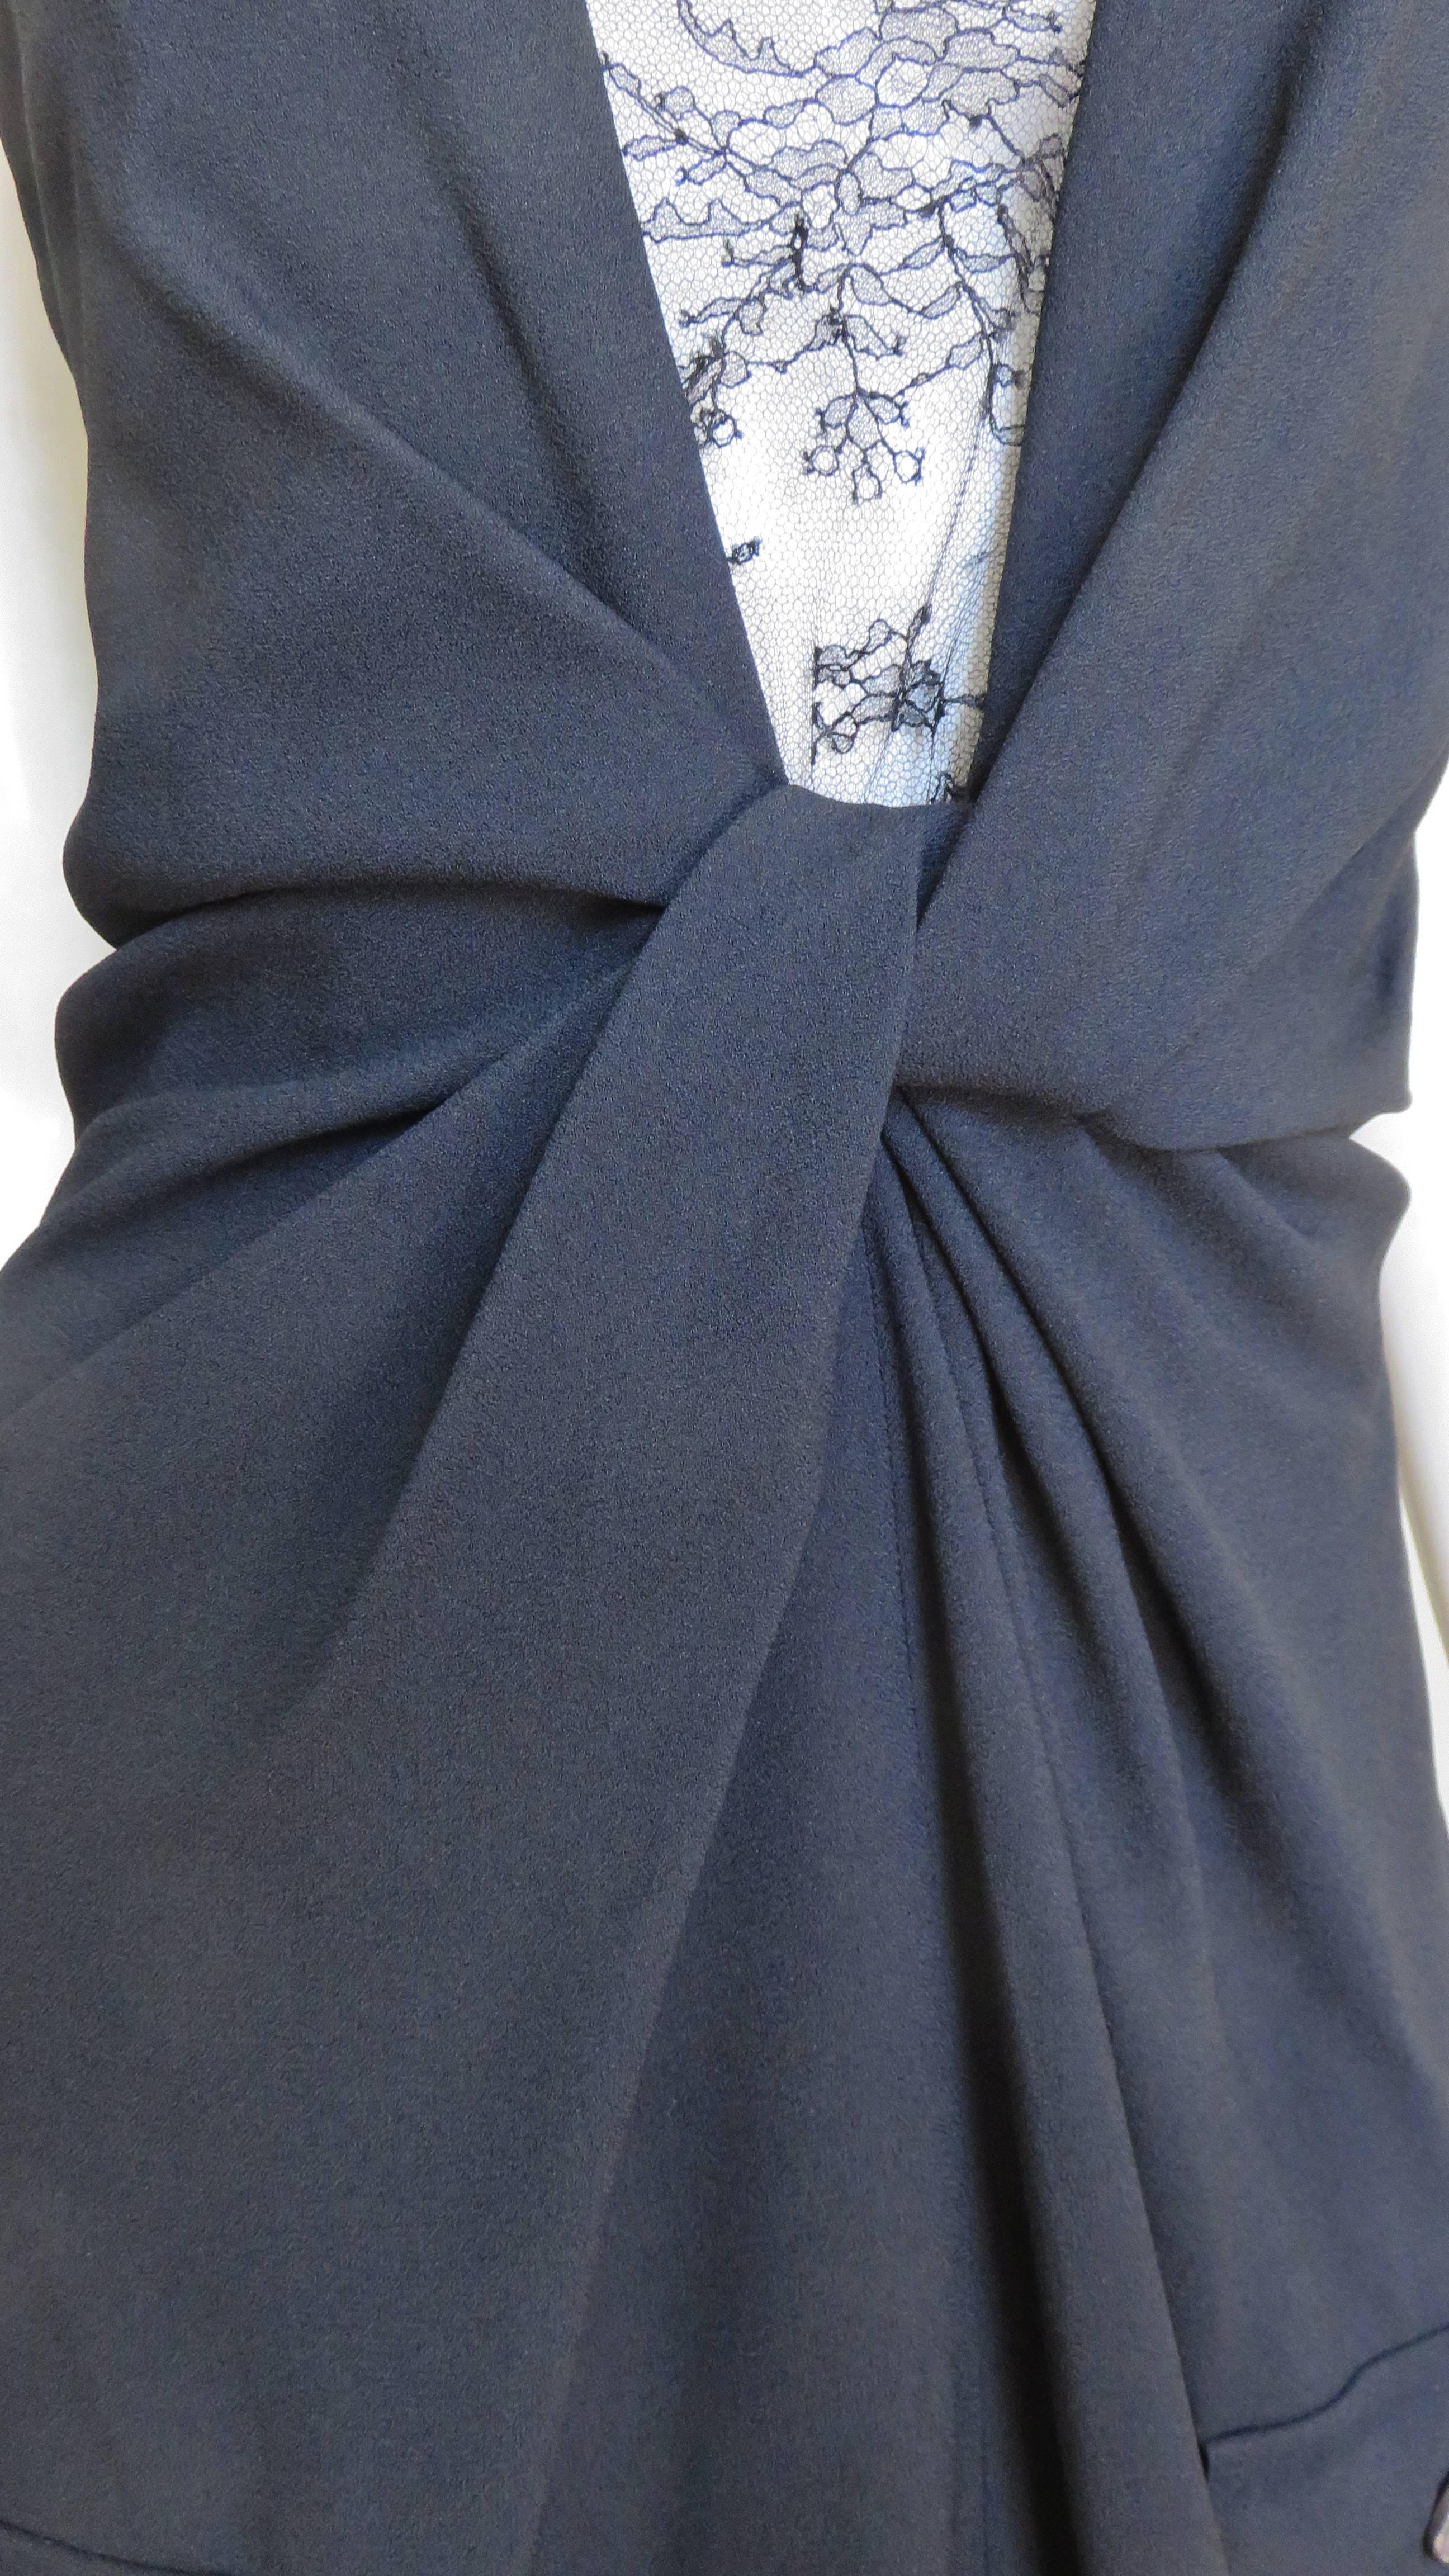 John Galliano for Christian Dior Silk Dress with Buckle Straps In Excellent Condition For Sale In Water Mill, NY